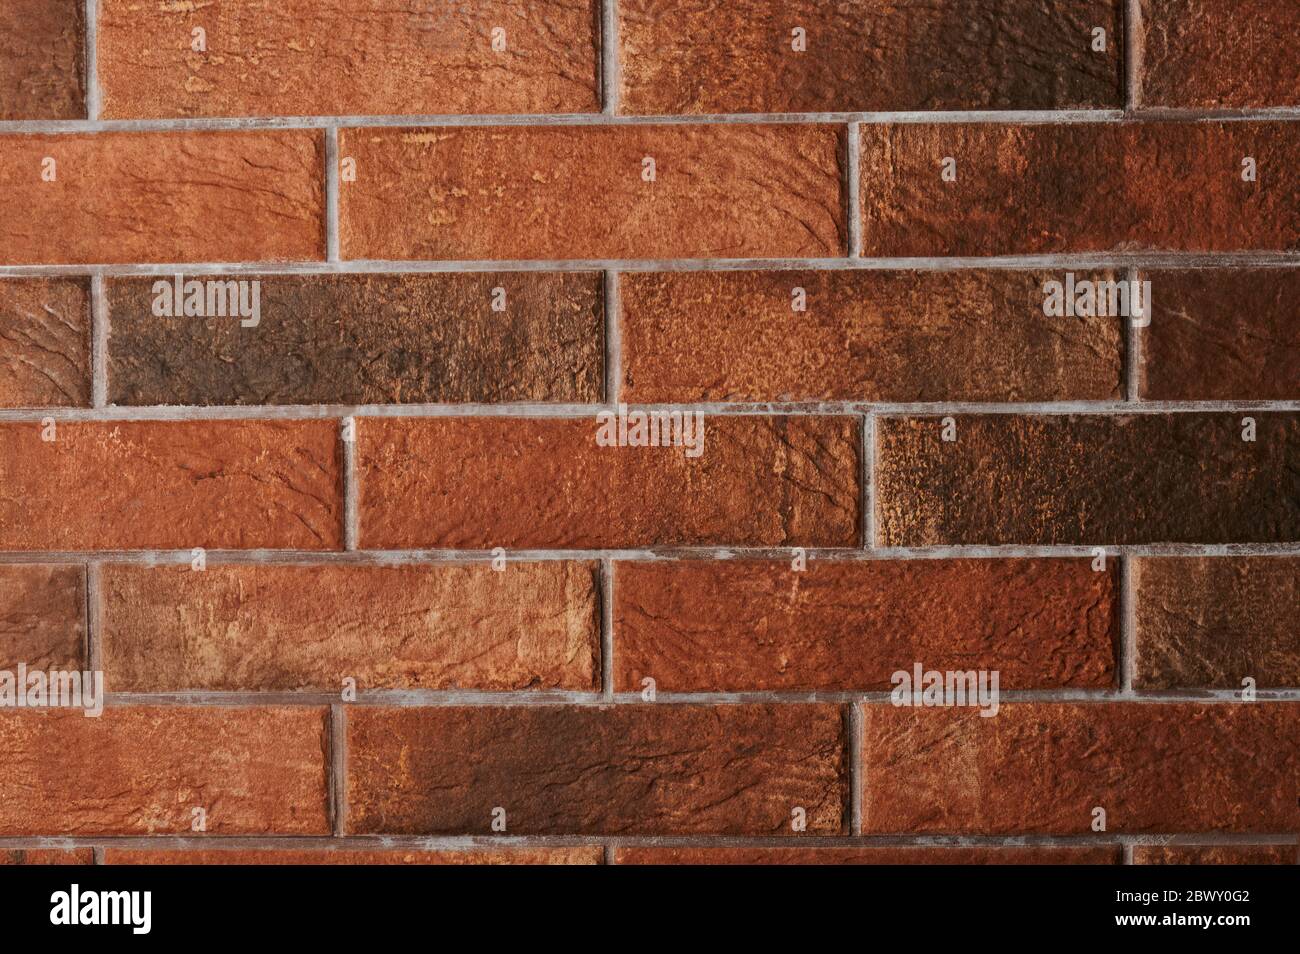 Red brick texture background close up view Stock Photo